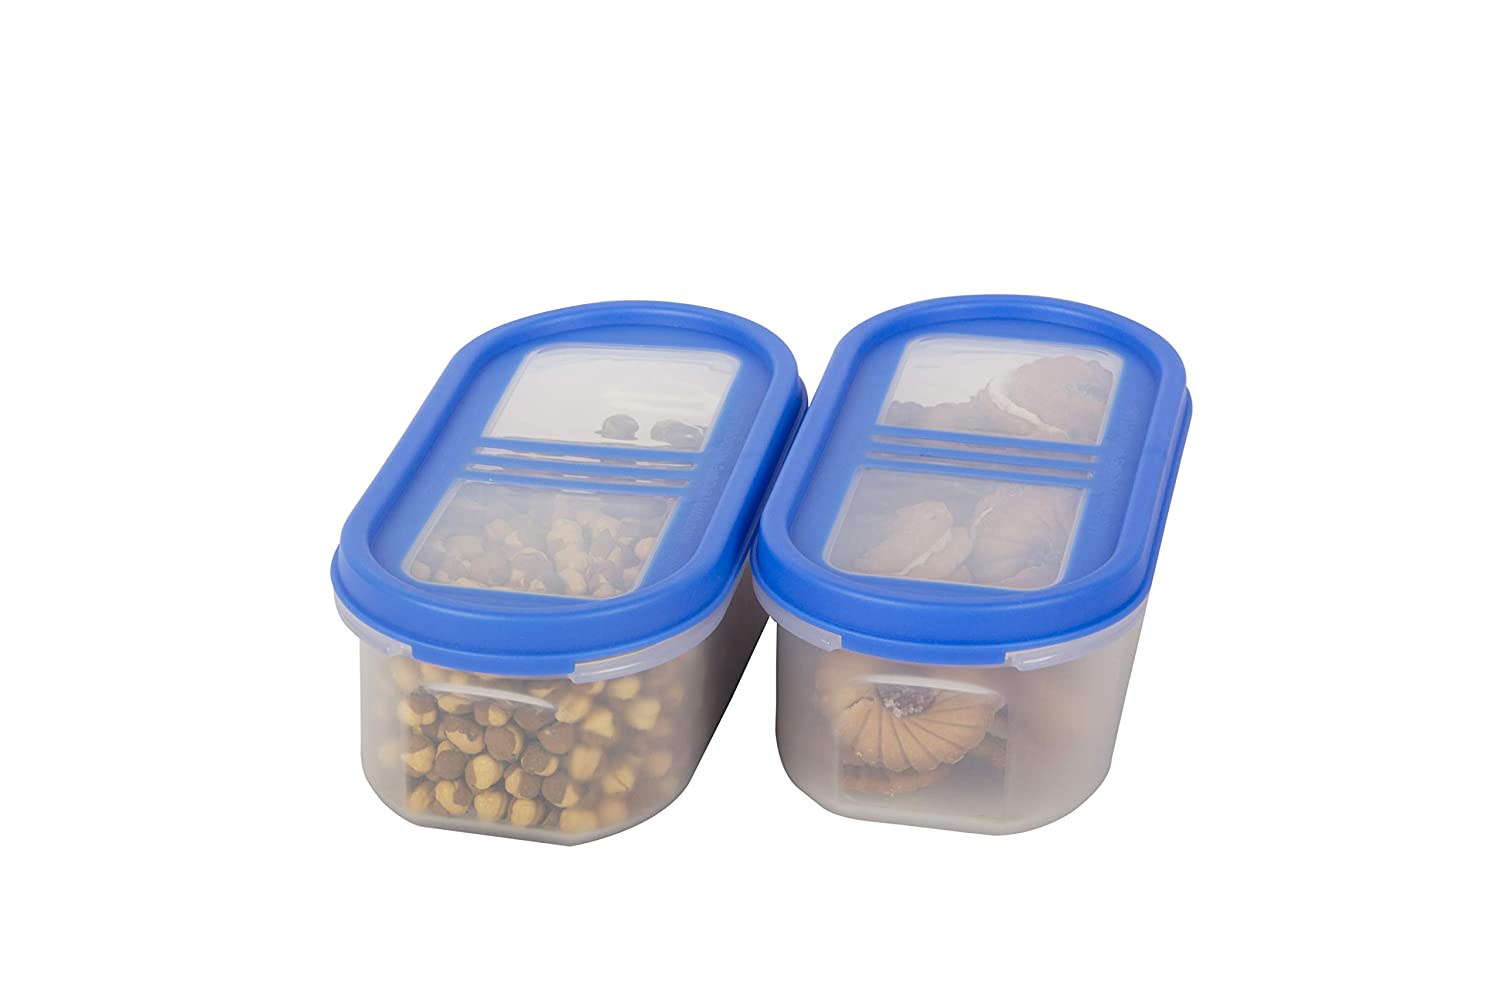 Cutting Edge Top 3 Line Modular Containers Oval Set for Cereals, Pulses, Snacks, Stackable Containers